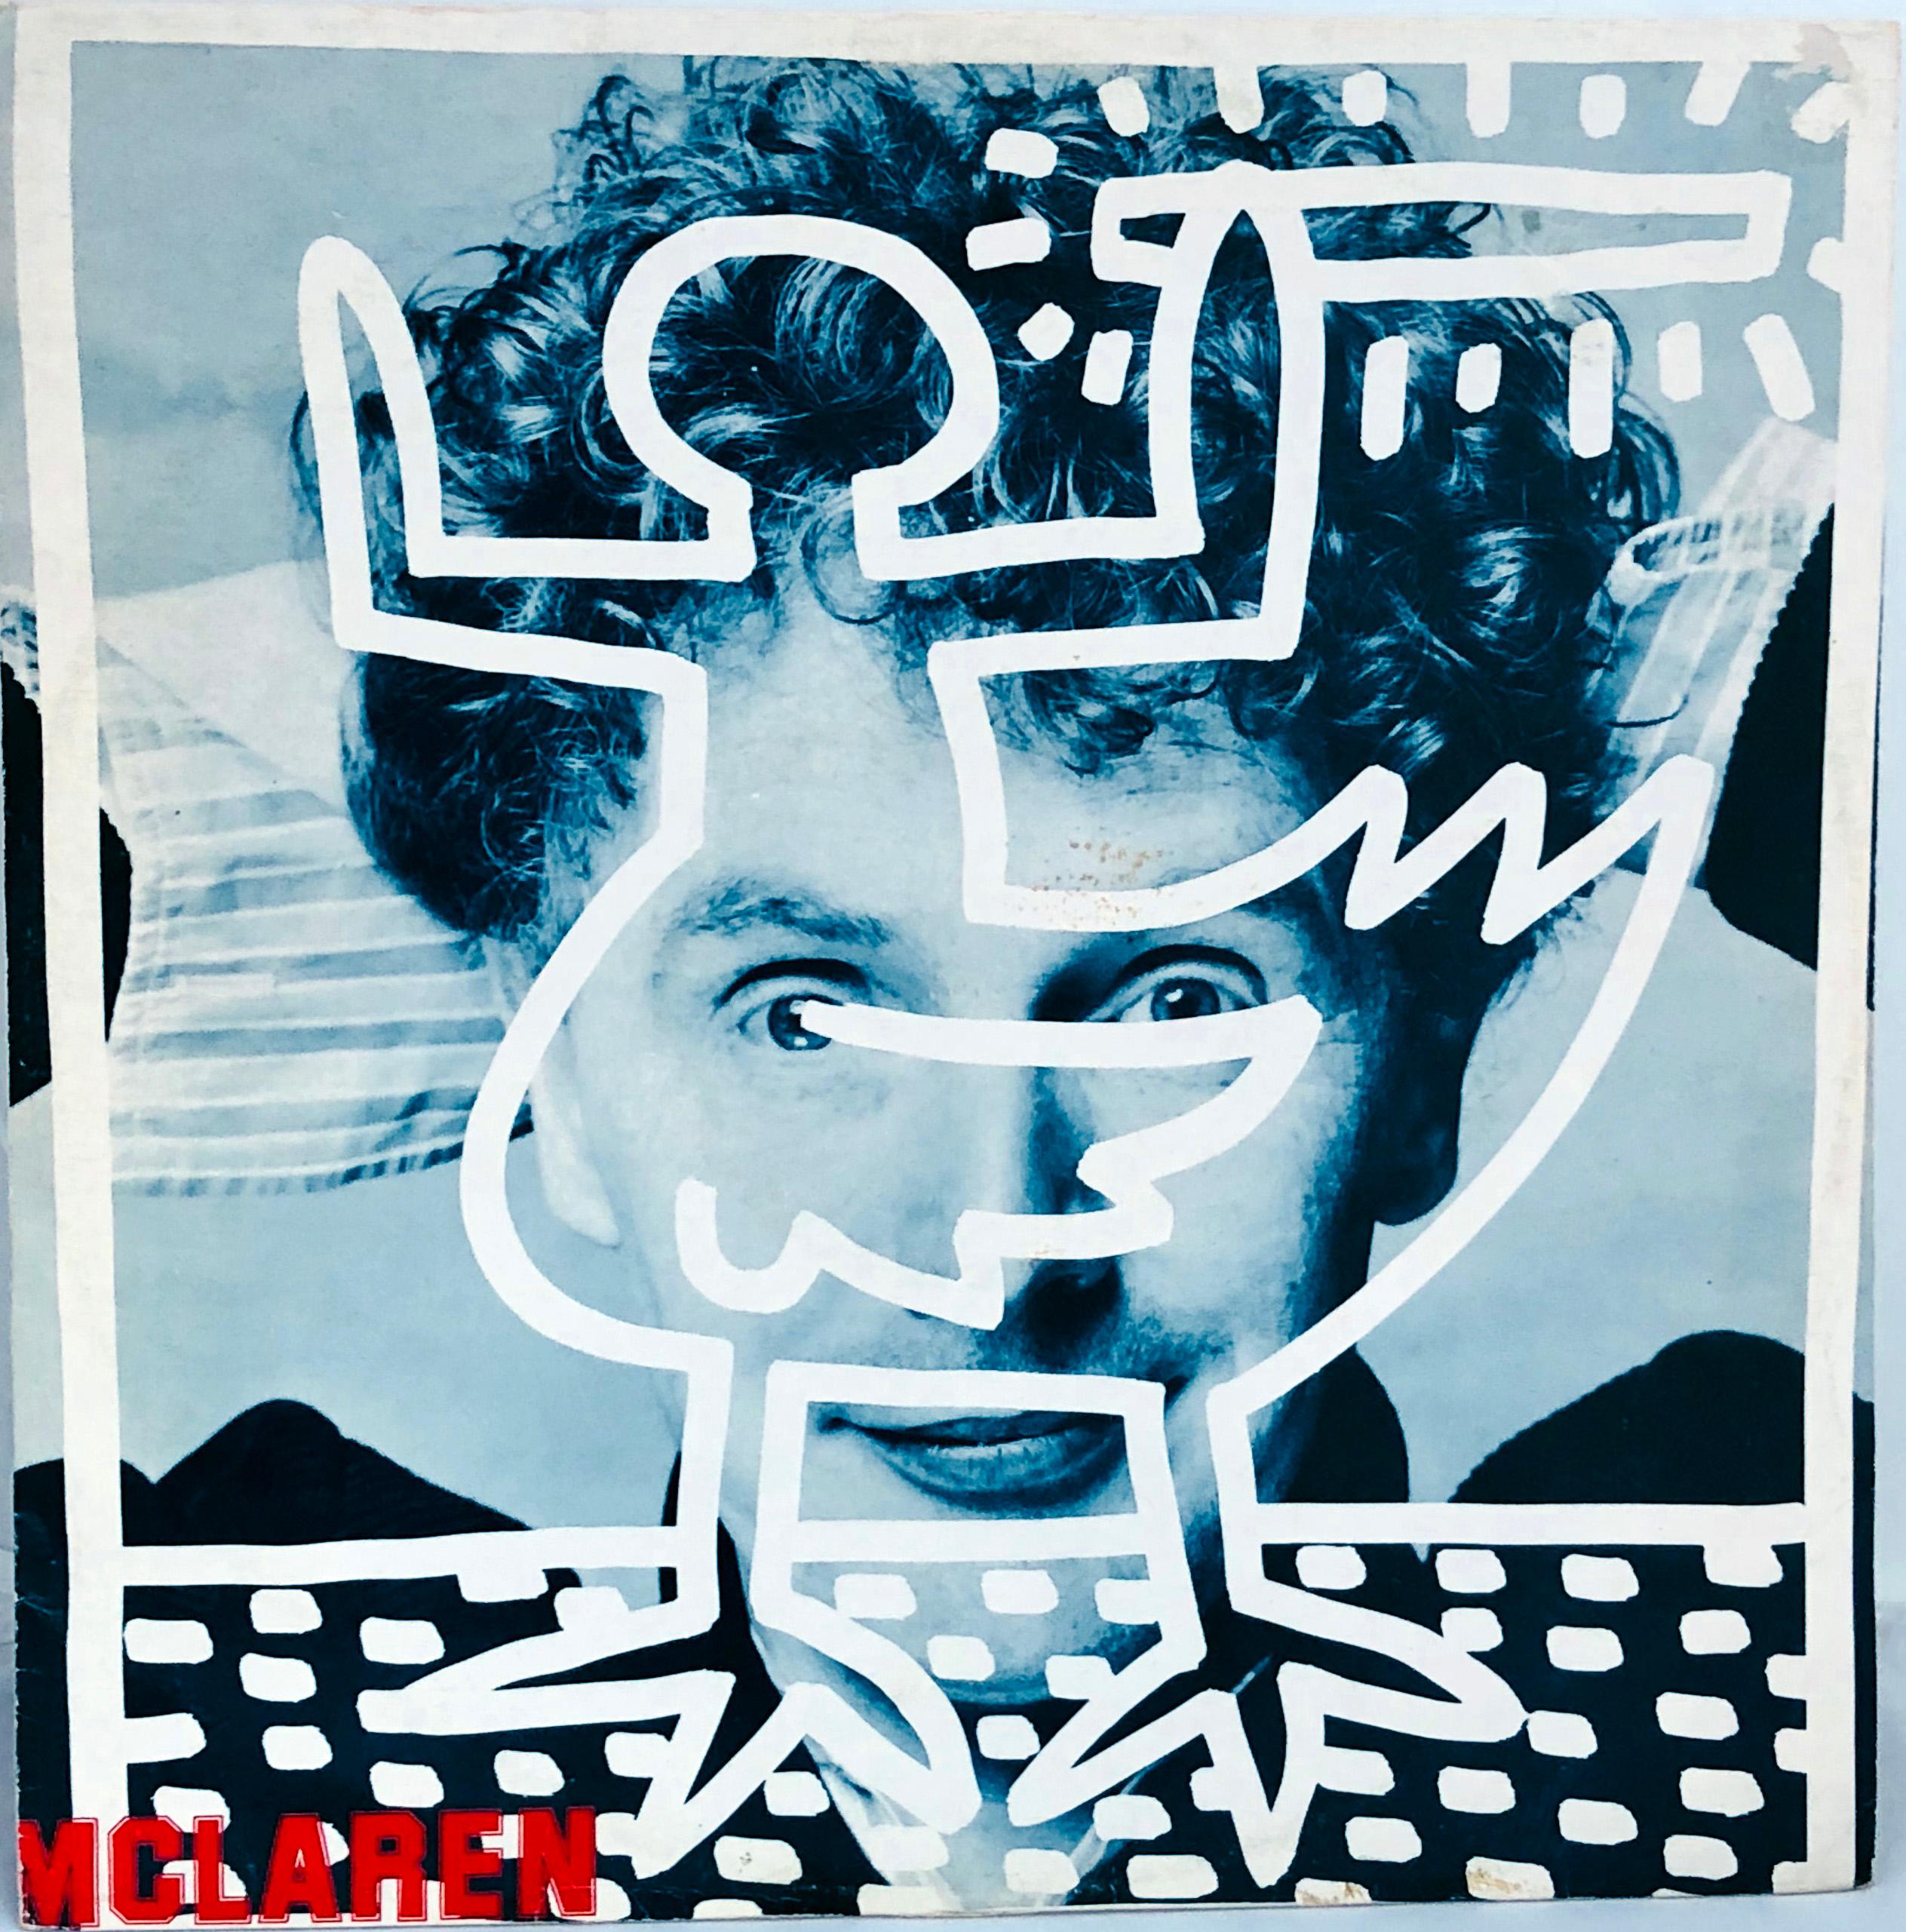 Vintage Keith Haring Record Cover Art, 1982. Record produced by the legendary Malcolm McLaren of Sex Pistols fame. 

12 x 12 inches / 30.48 x 30.48 cm 
Minor service wear and spotting in a couple of areas; otherwise goof condition 
Includes original